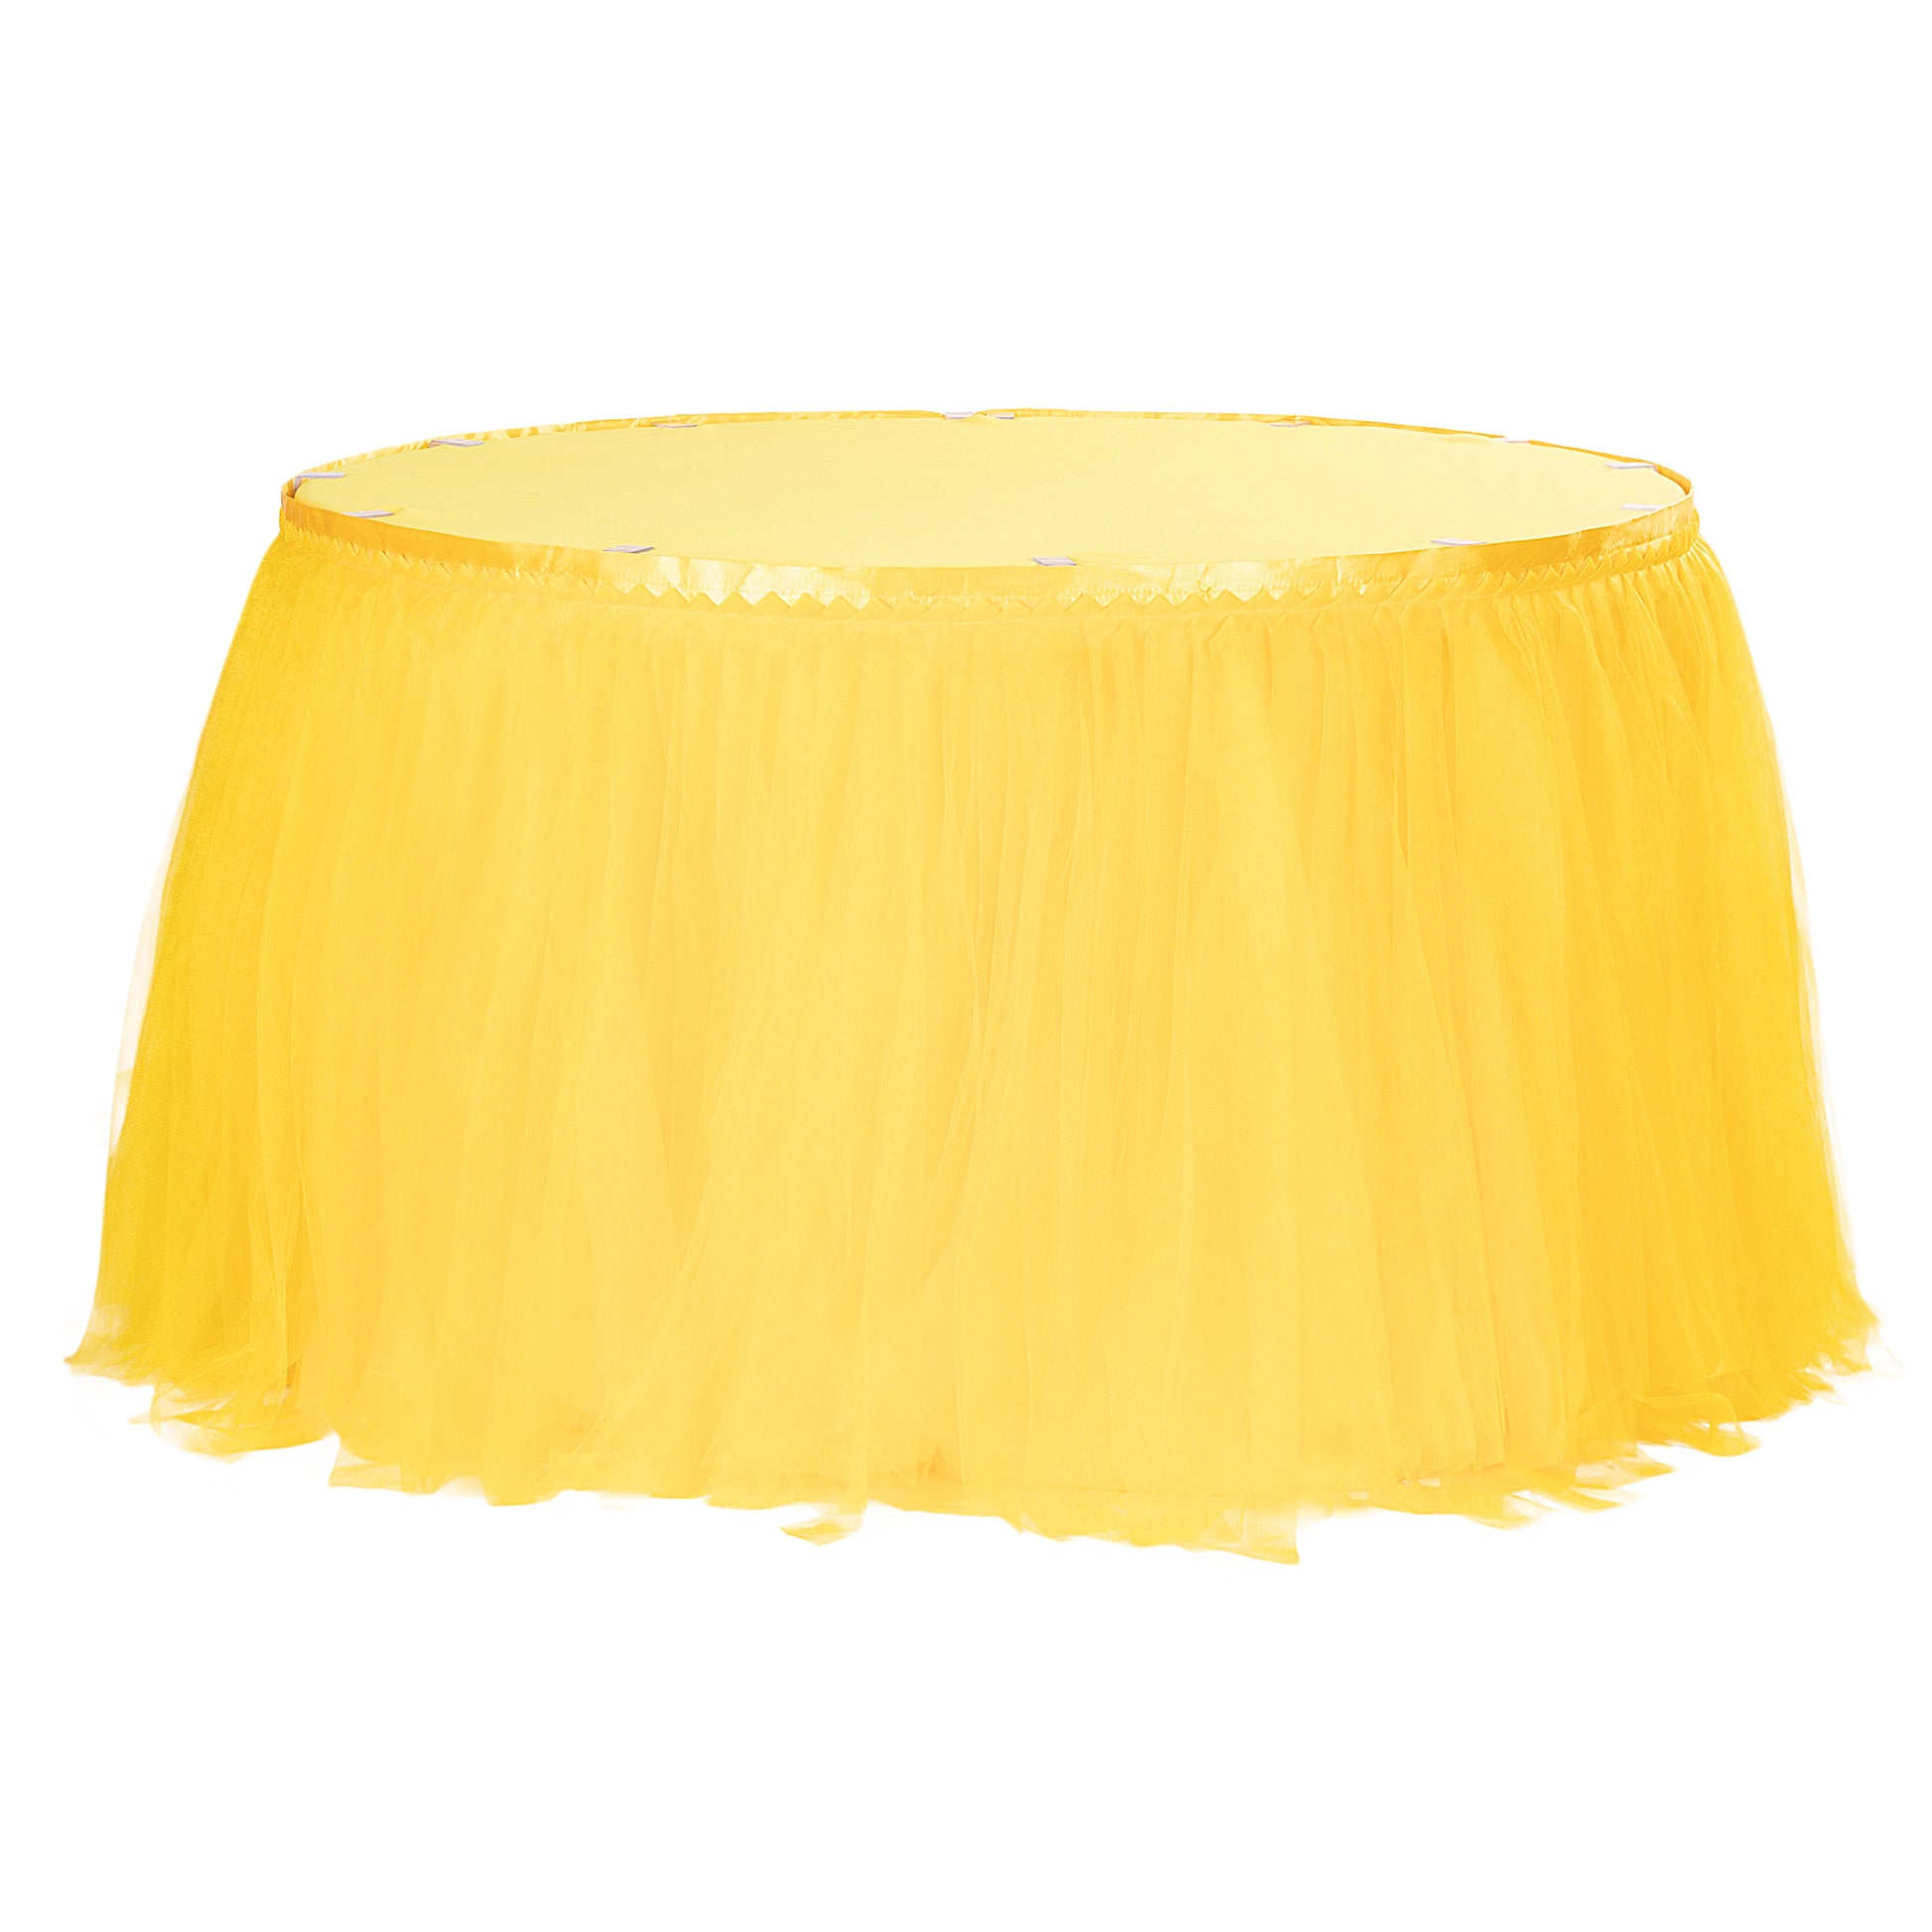 Tulle Tutu 14ft Table Skirt - Canary Yellow - CV Linens